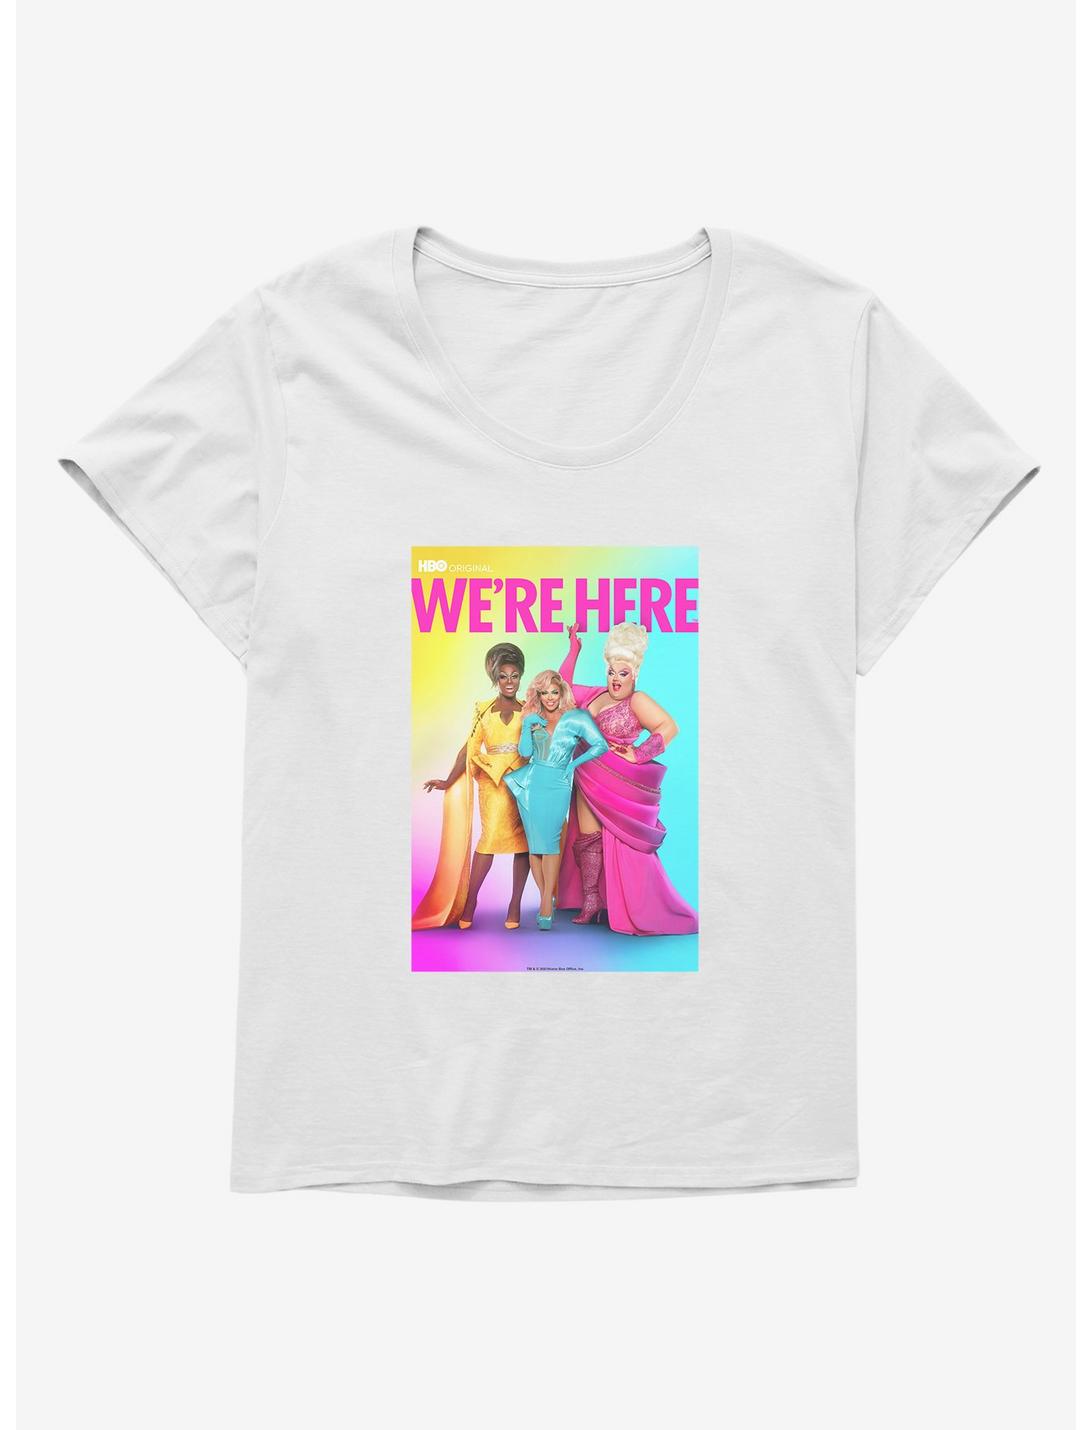 We're Here TV Poster Girls T-Shirt Plus Size, , hi-res